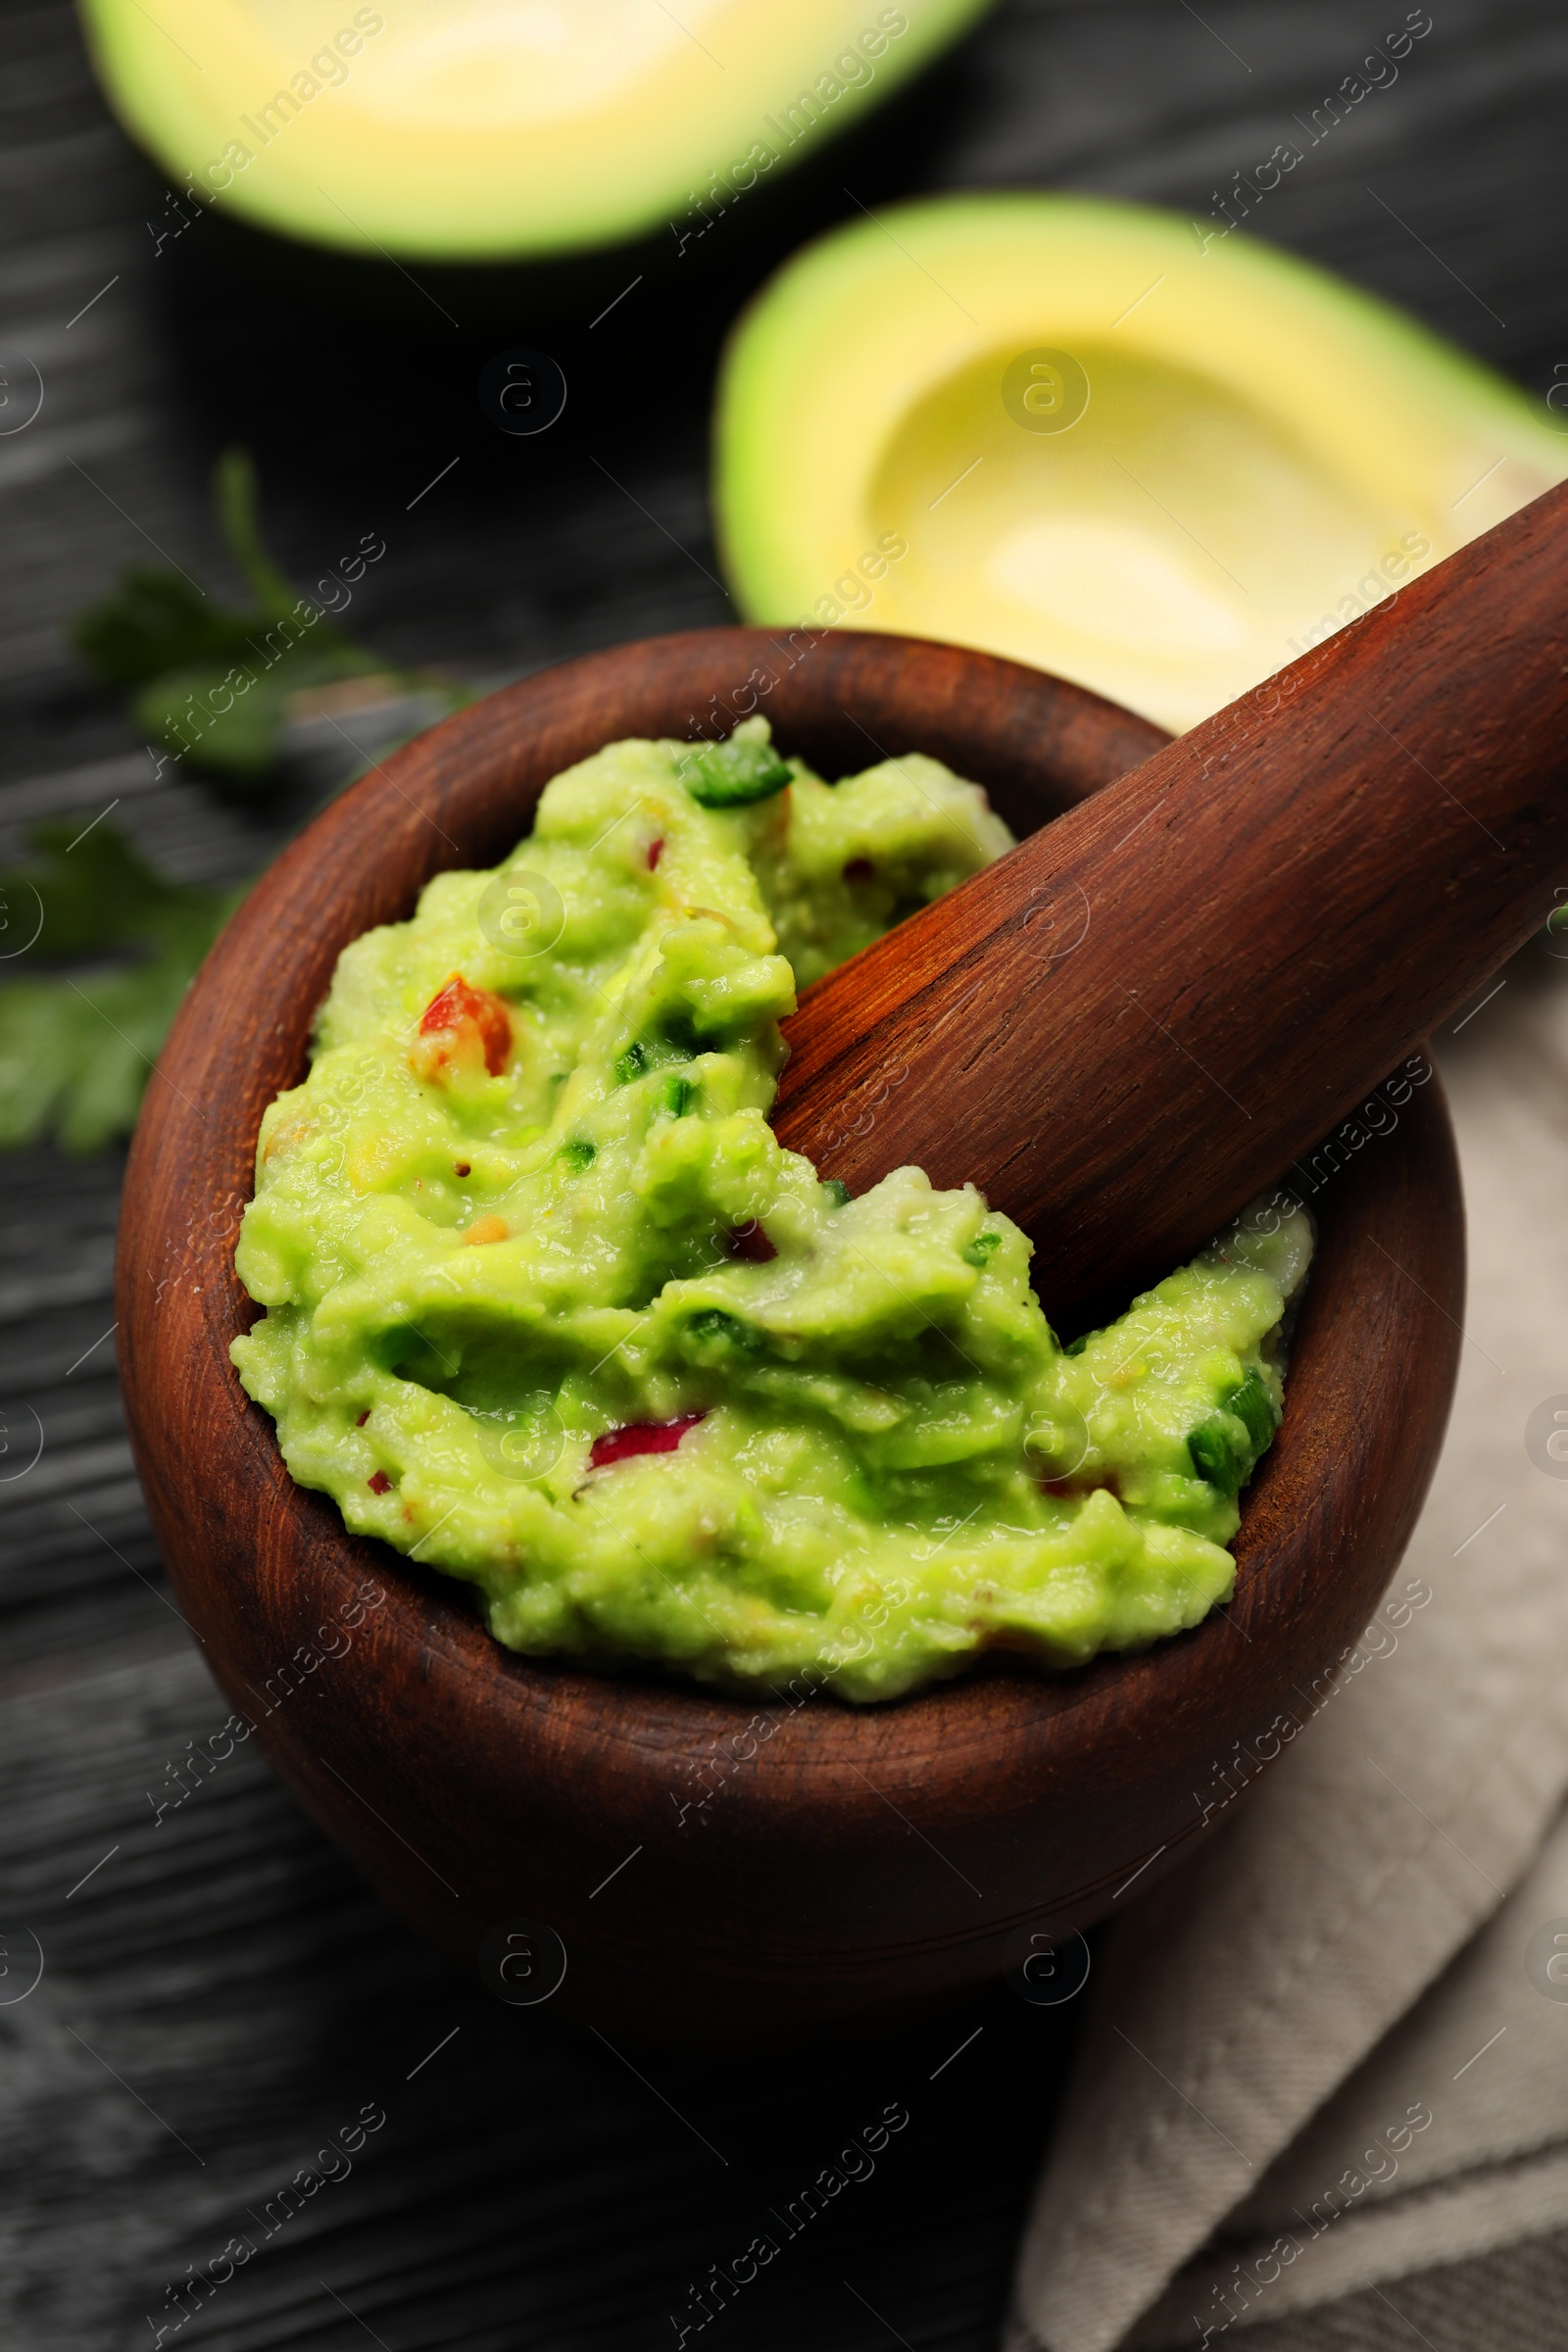 Photo of Mortar with delicious guacamole and ingredients on black wooden table, closeup